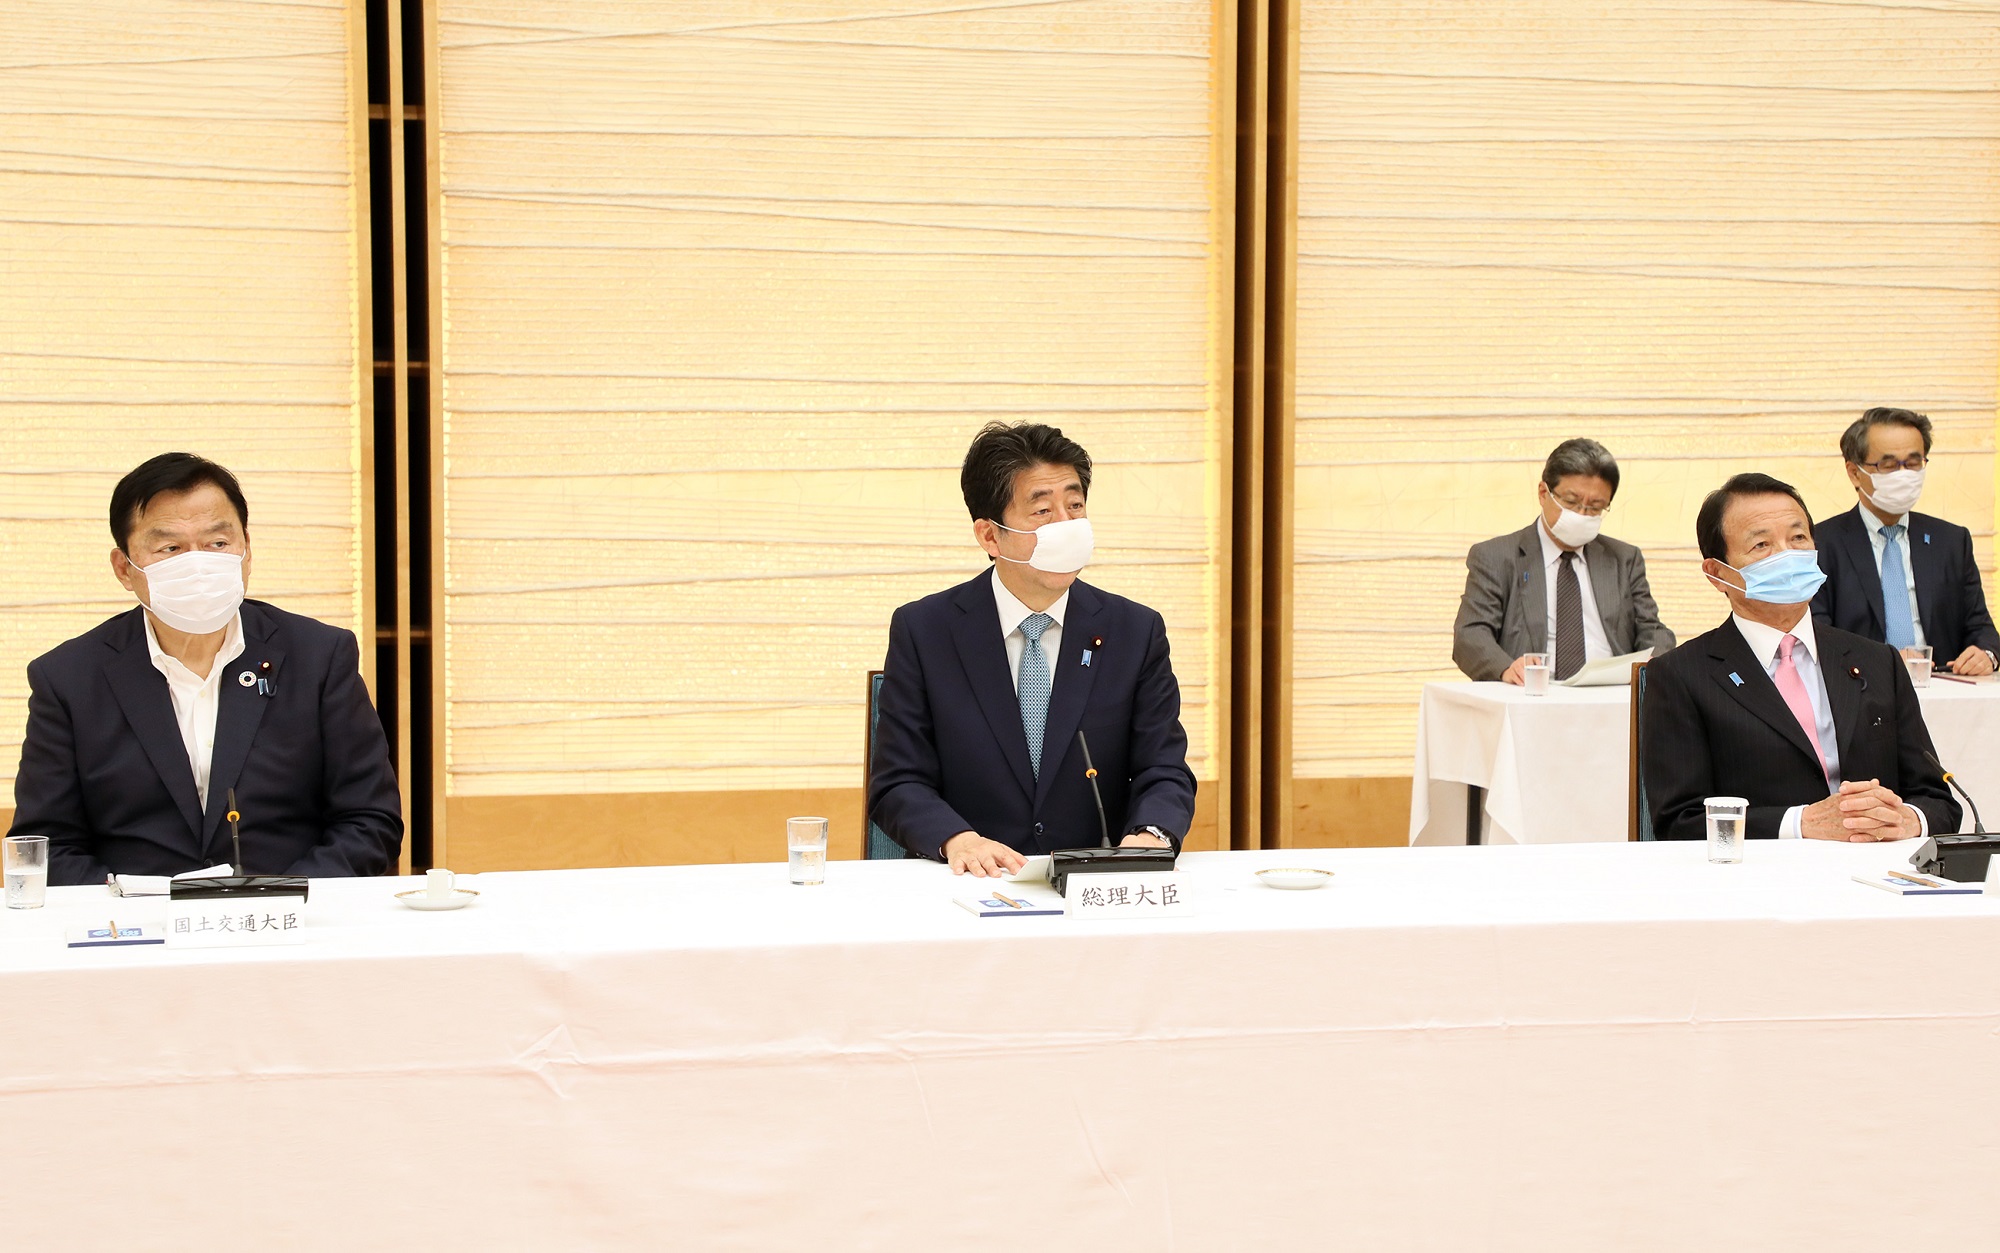 Photograph of the Prime Minister making a statement (1)